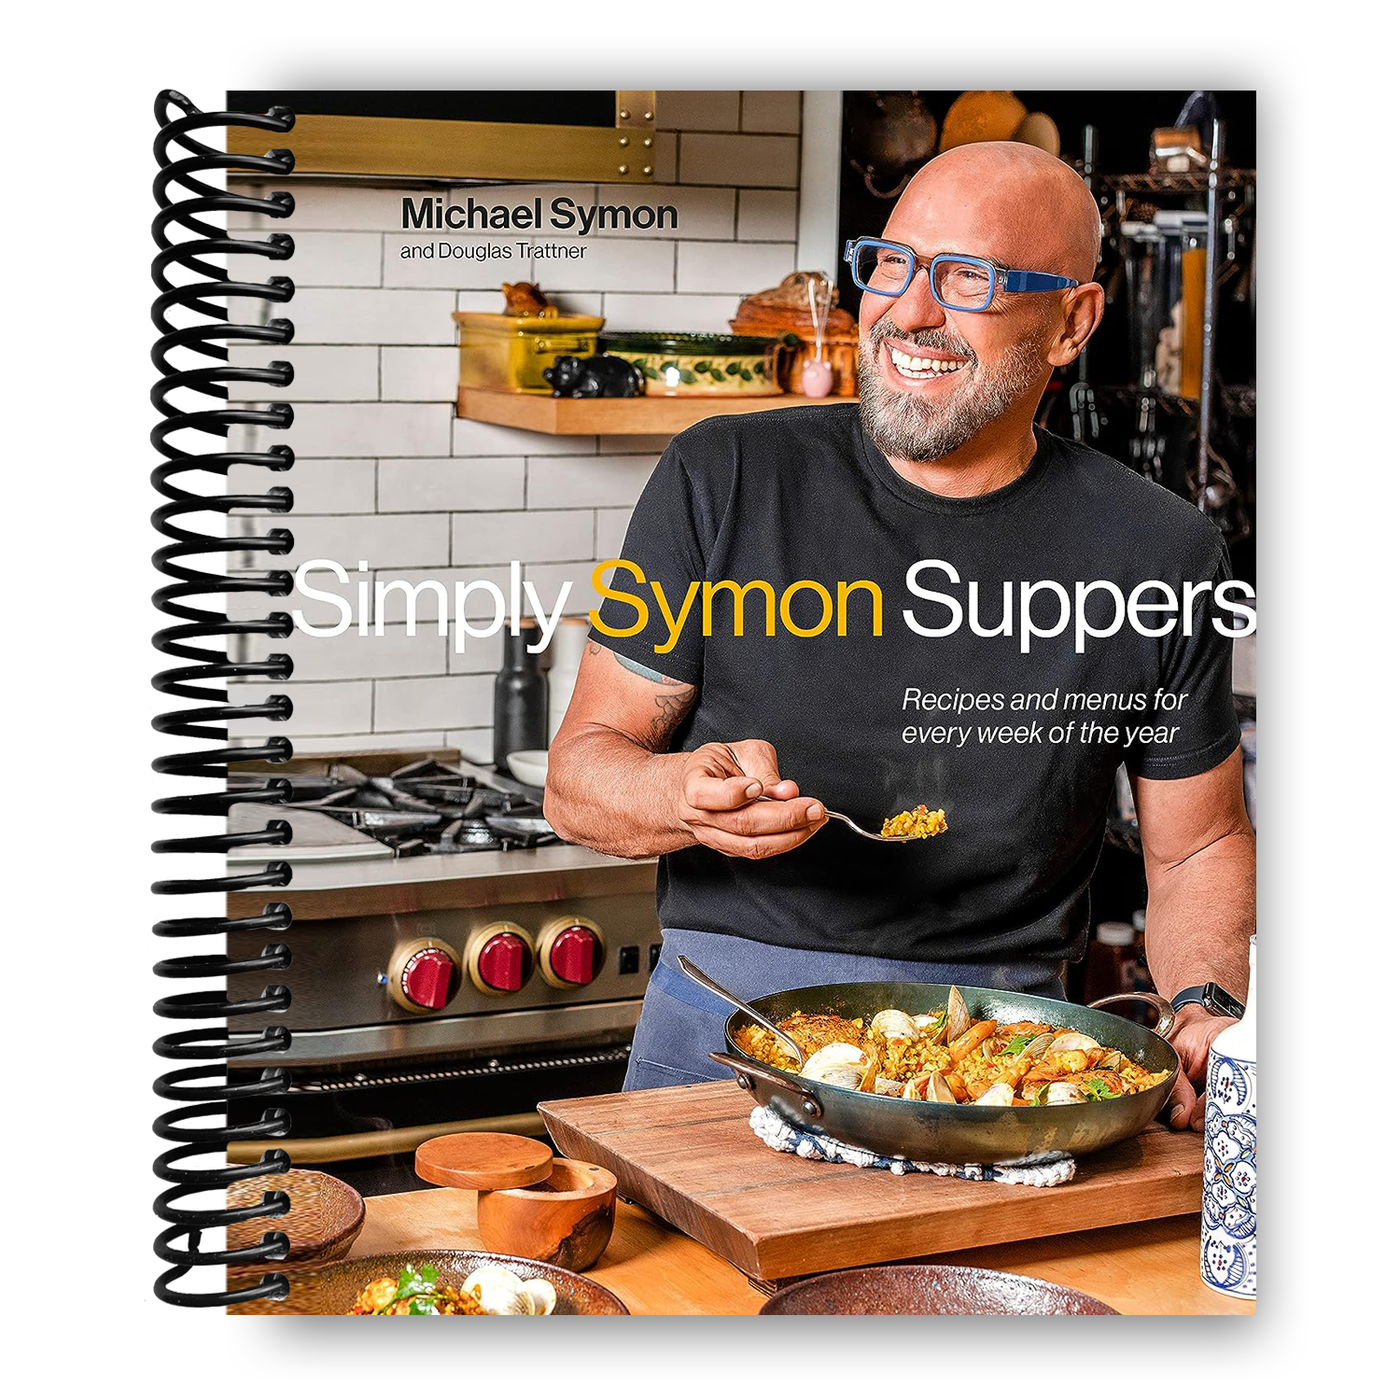 Simply Symon Suppers: Recipes and Menus for Every Week of the Year (Spiral Bound)